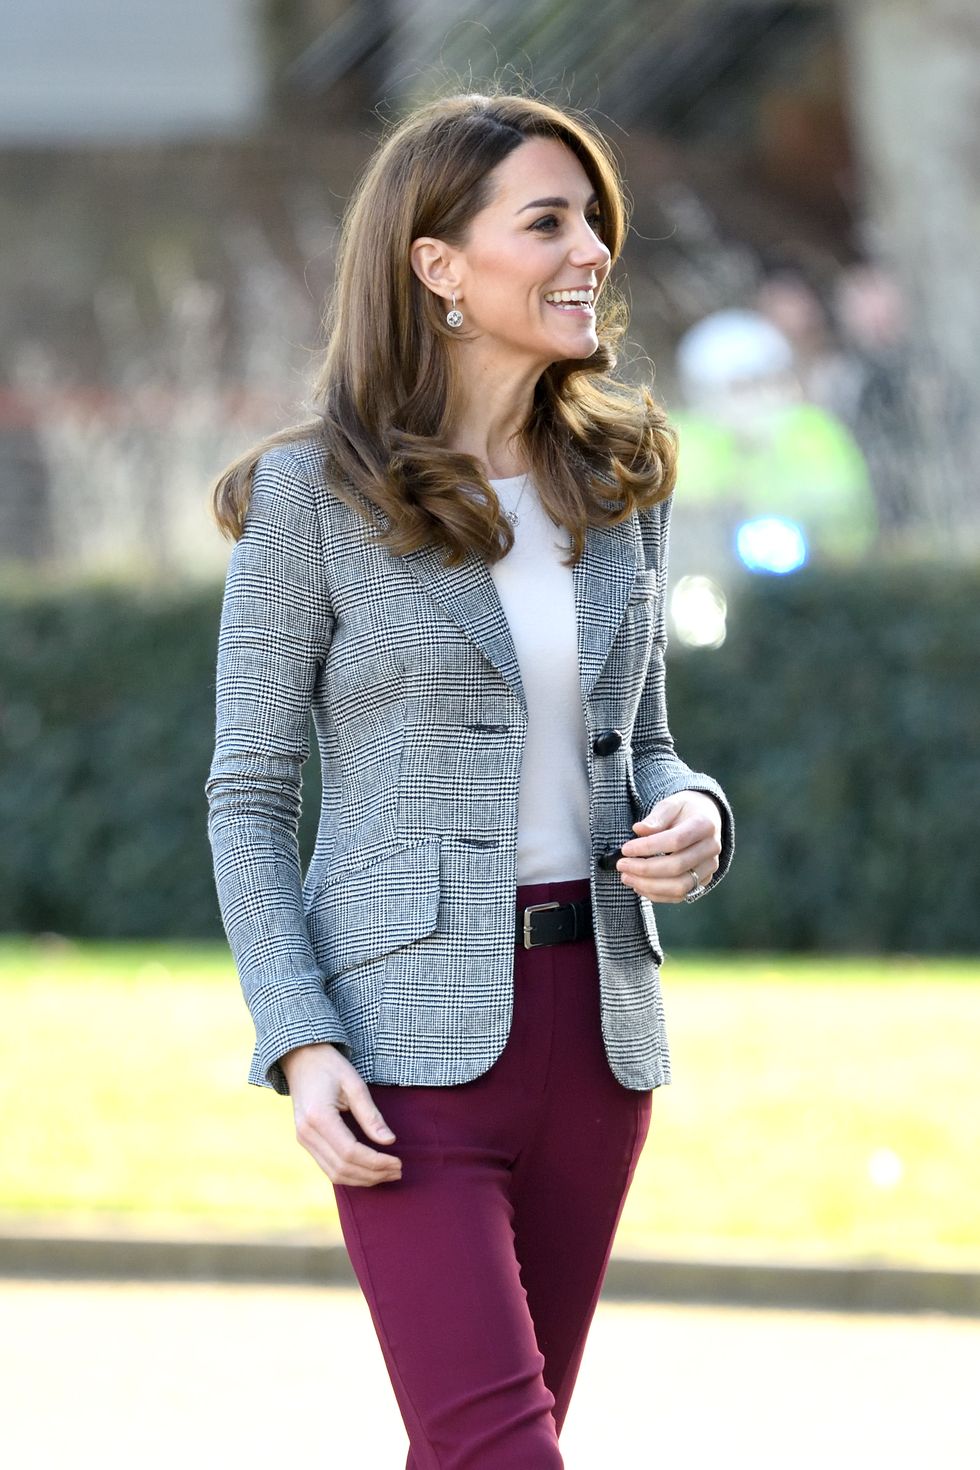 Kate Middleton Paired a Gray Plaid Blazer With an All-Black Look